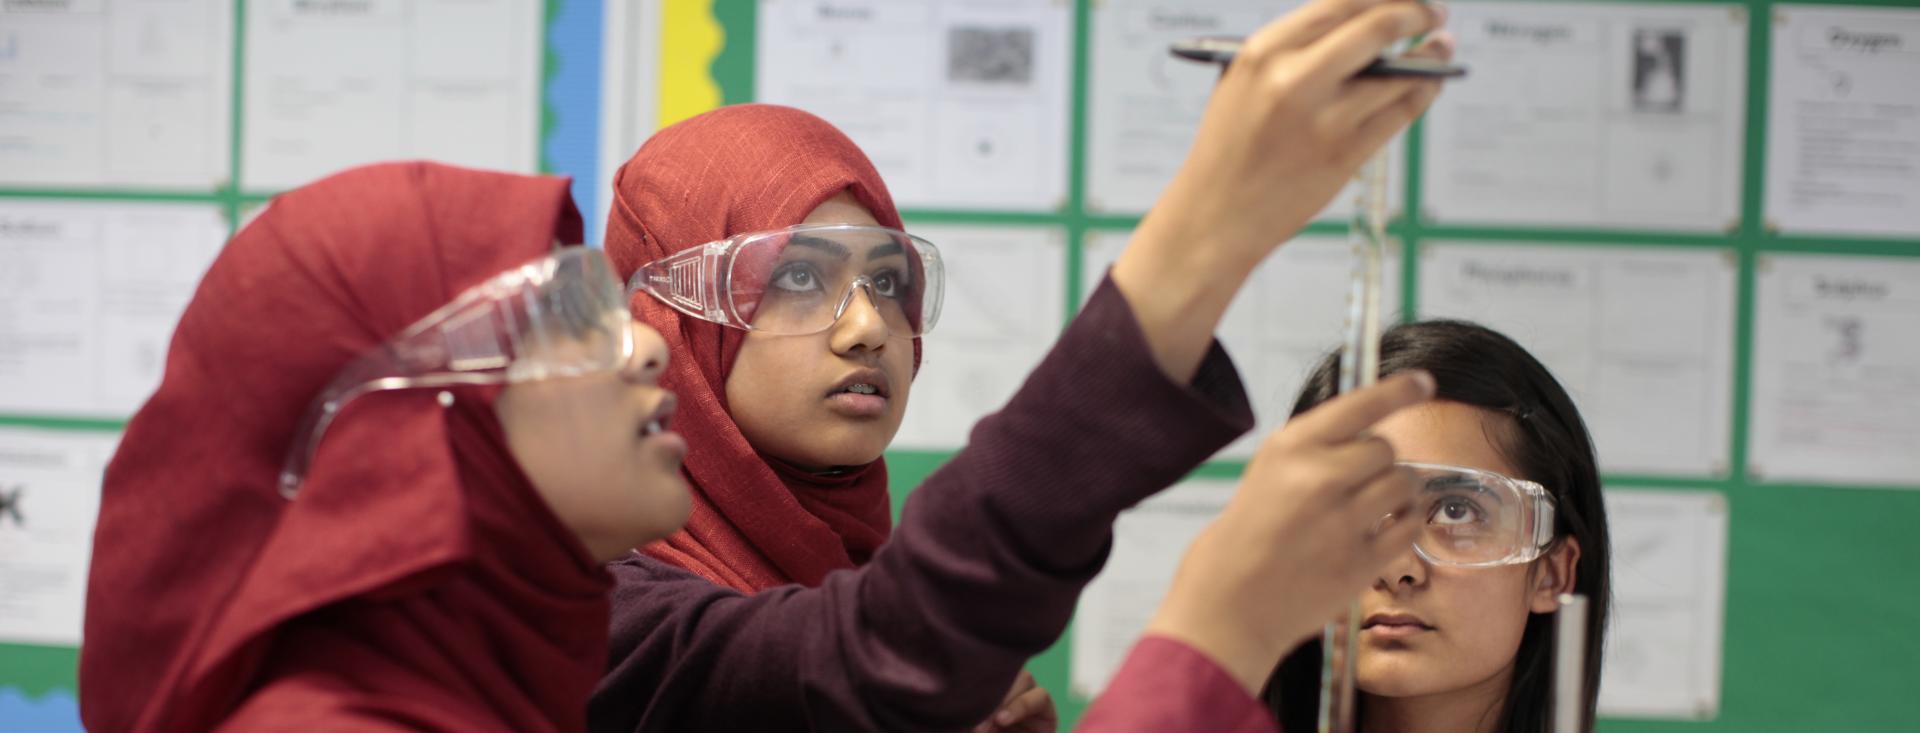 Three adolescent girls wearing all red uniforms are conducting a science experiment in a classroom with bulletin boards behind them. All of them are wearing clear, chemical safety goggles, and two of them are wearing hijabs. They are looking intently upward as they measure a liquid in a graduated cylinder.